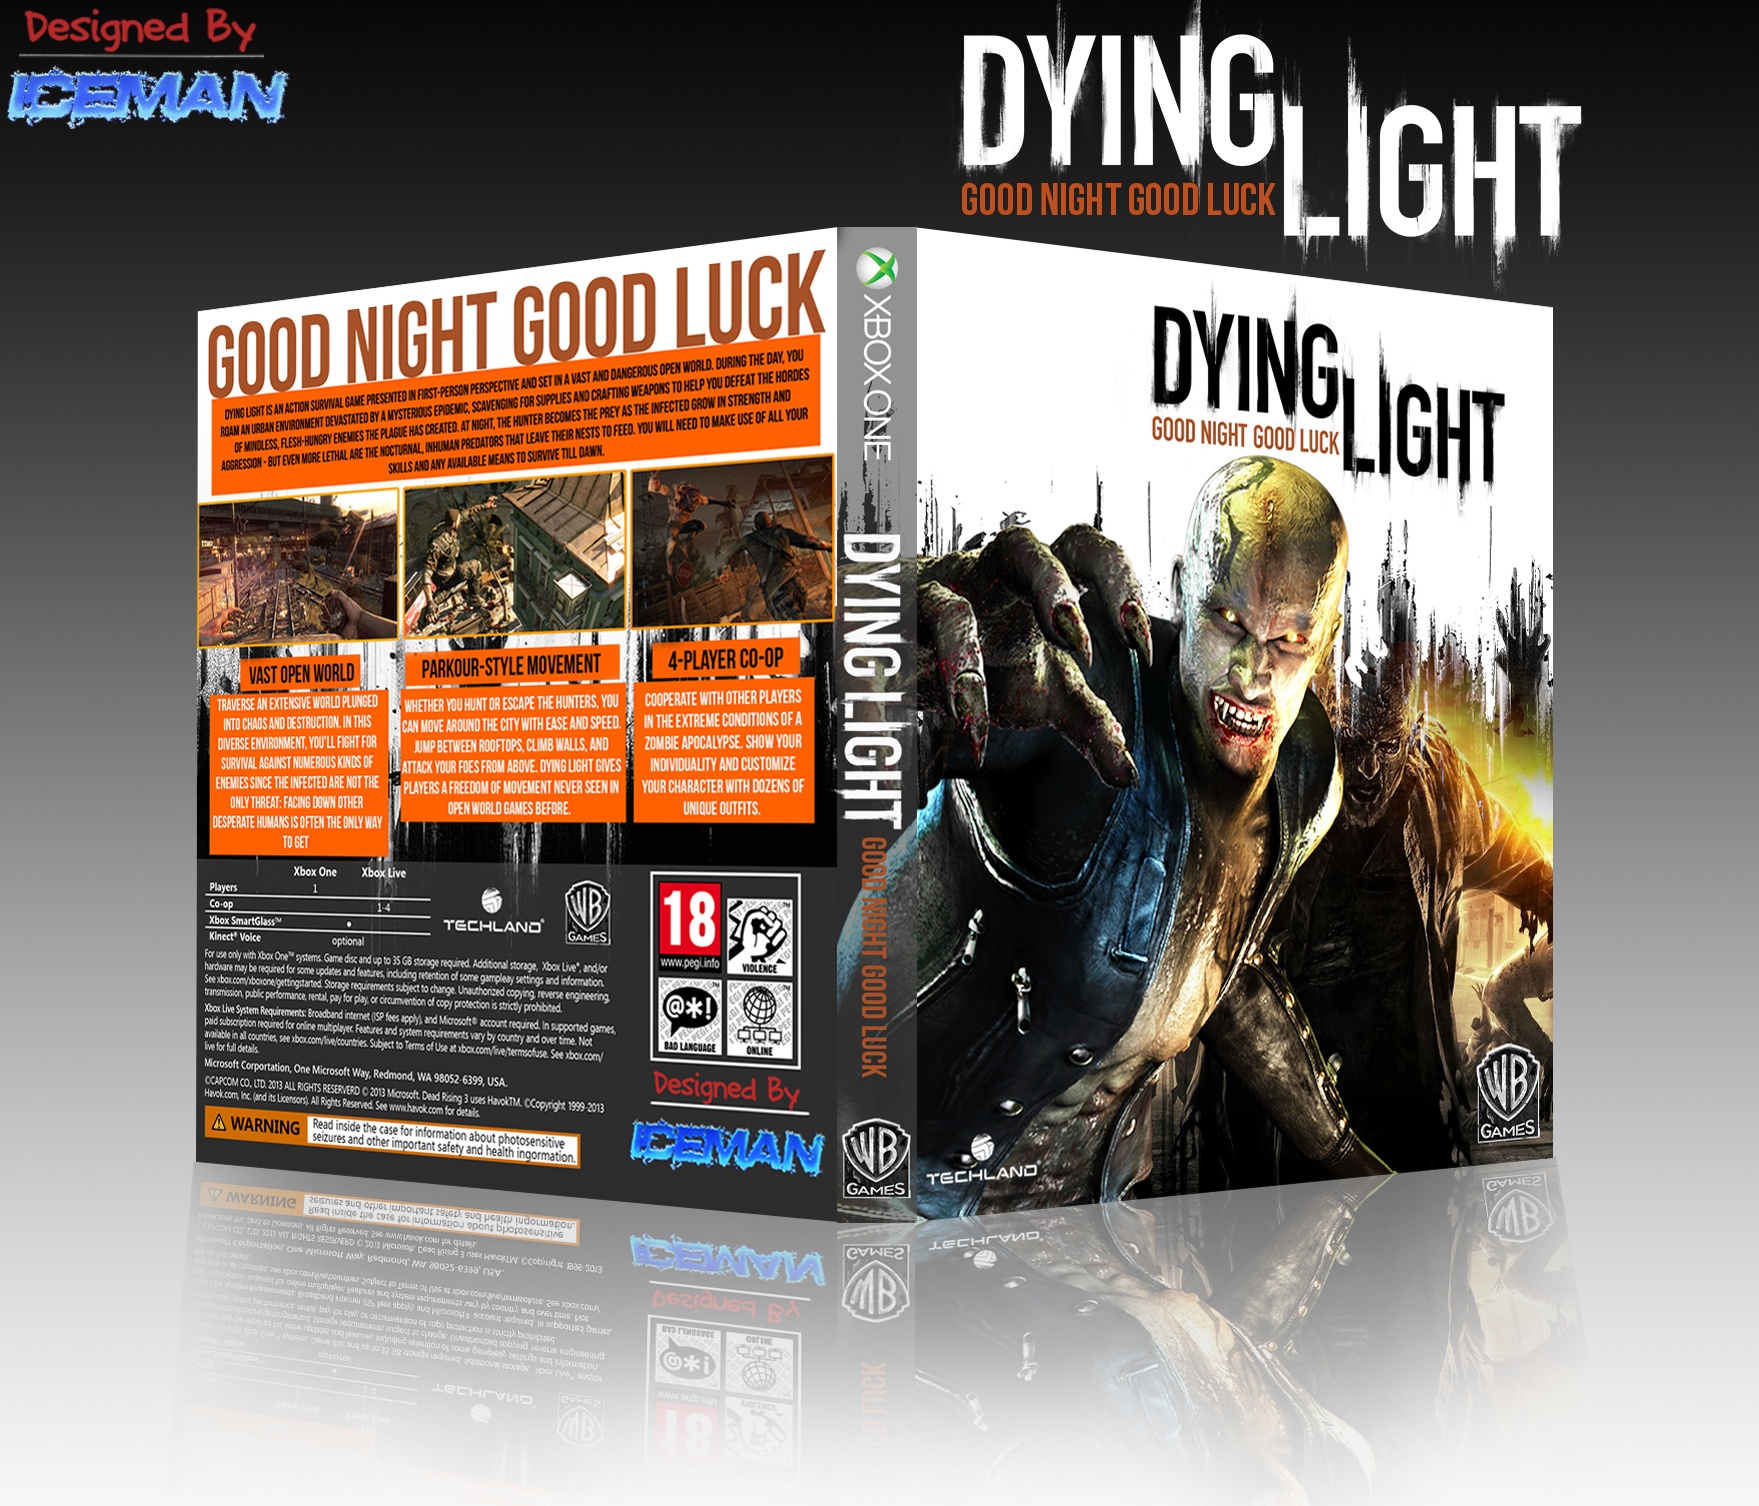 Viewing full size Dying Light box cover